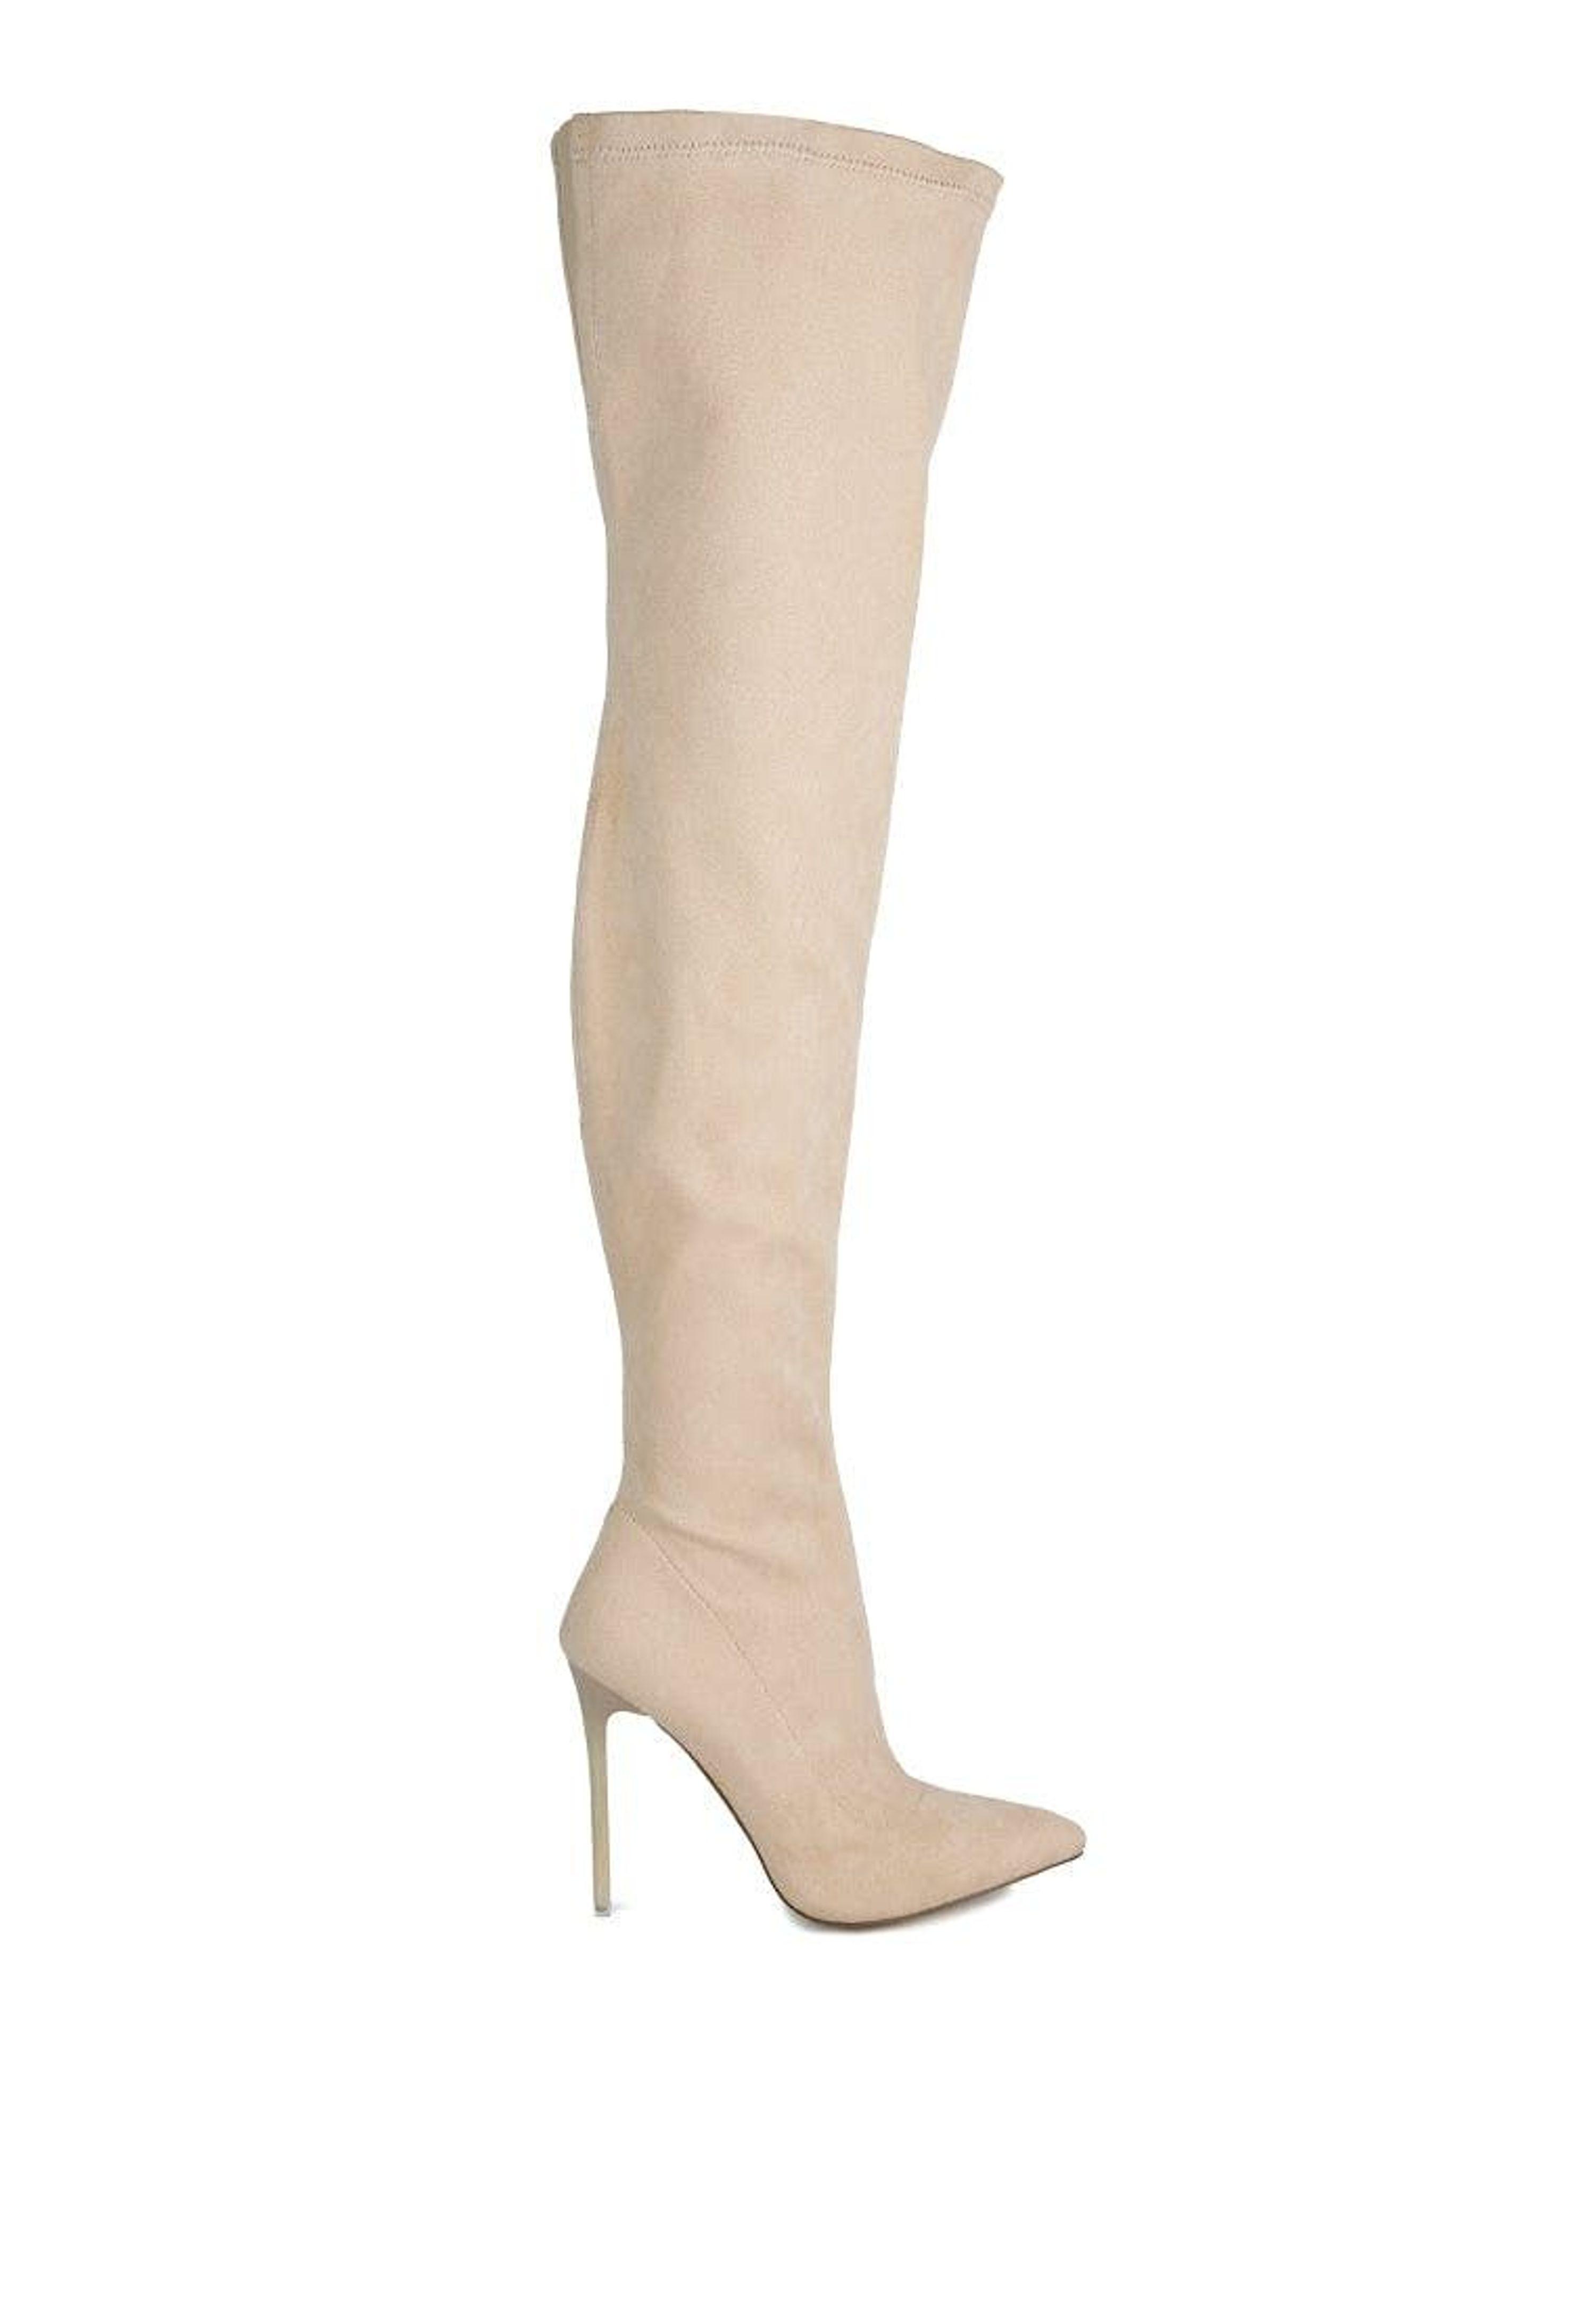 LONDON RAG Atelier Stretch Faux Suede Stiletto Long Boots in White | Lyst